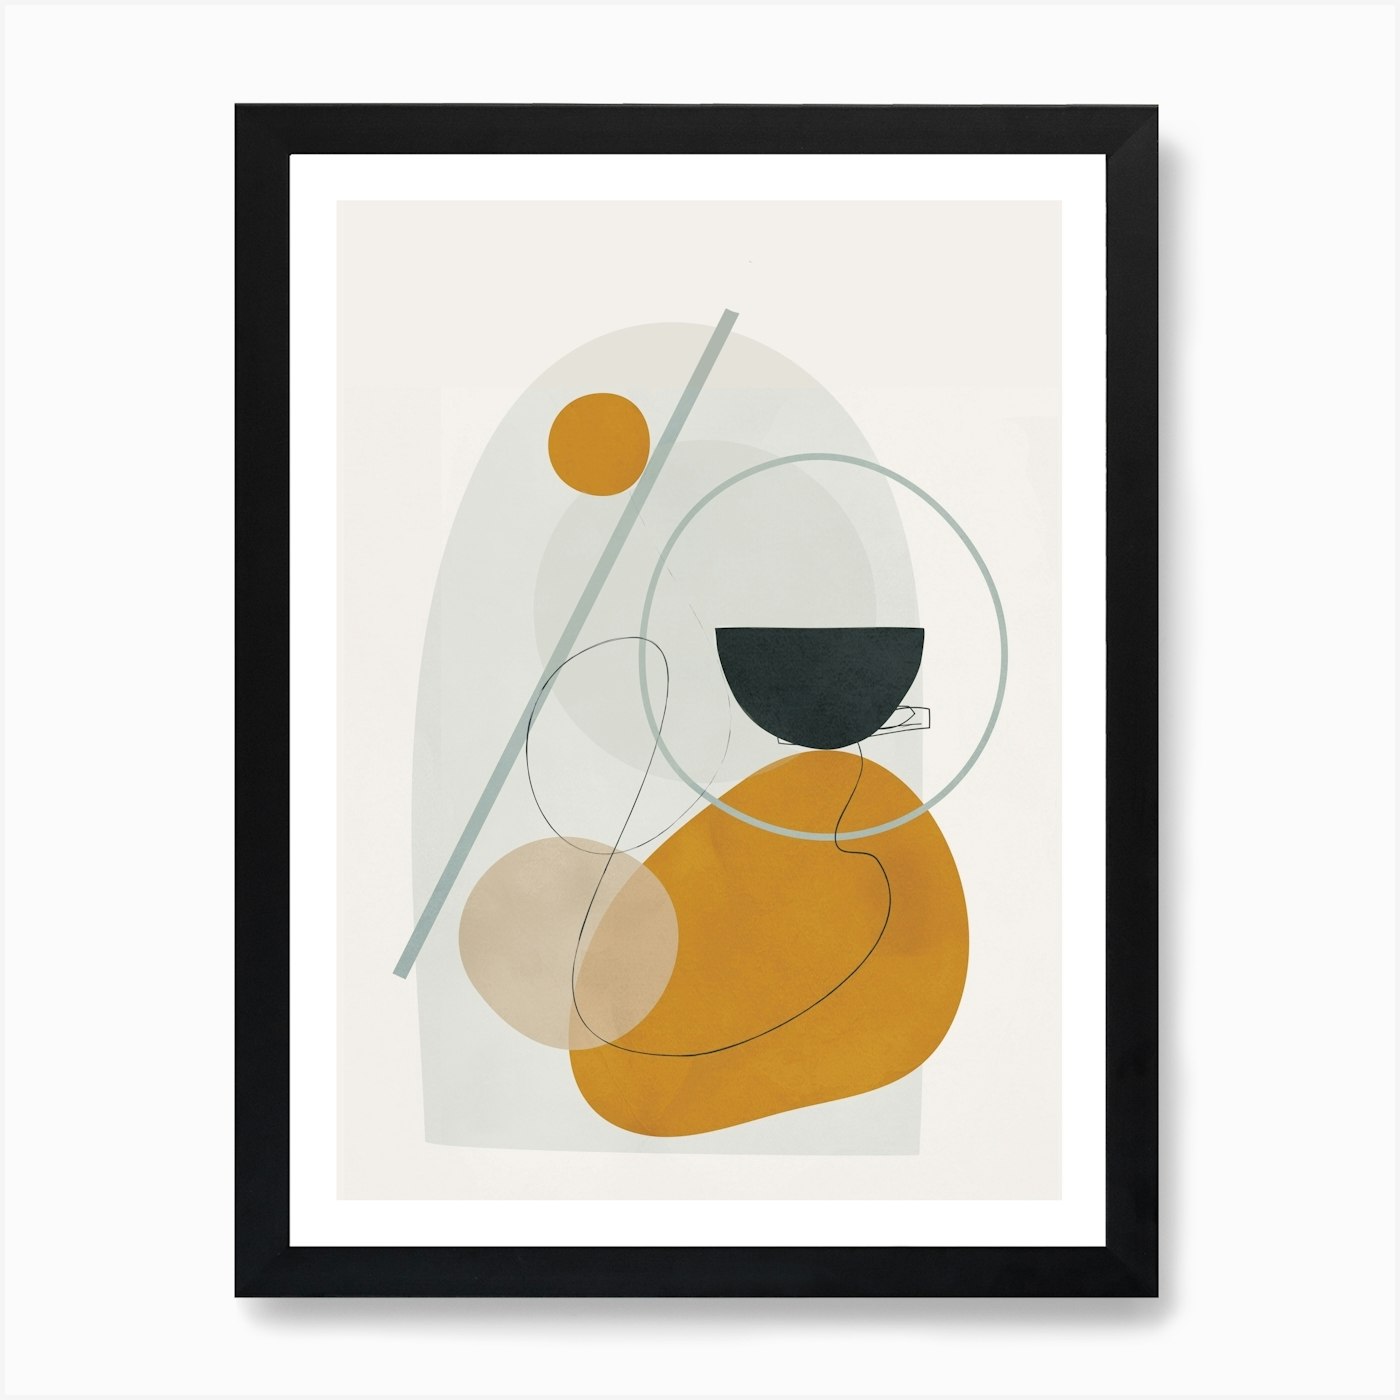 Abstract Shapes - by Art No Print City Fy 4 Art